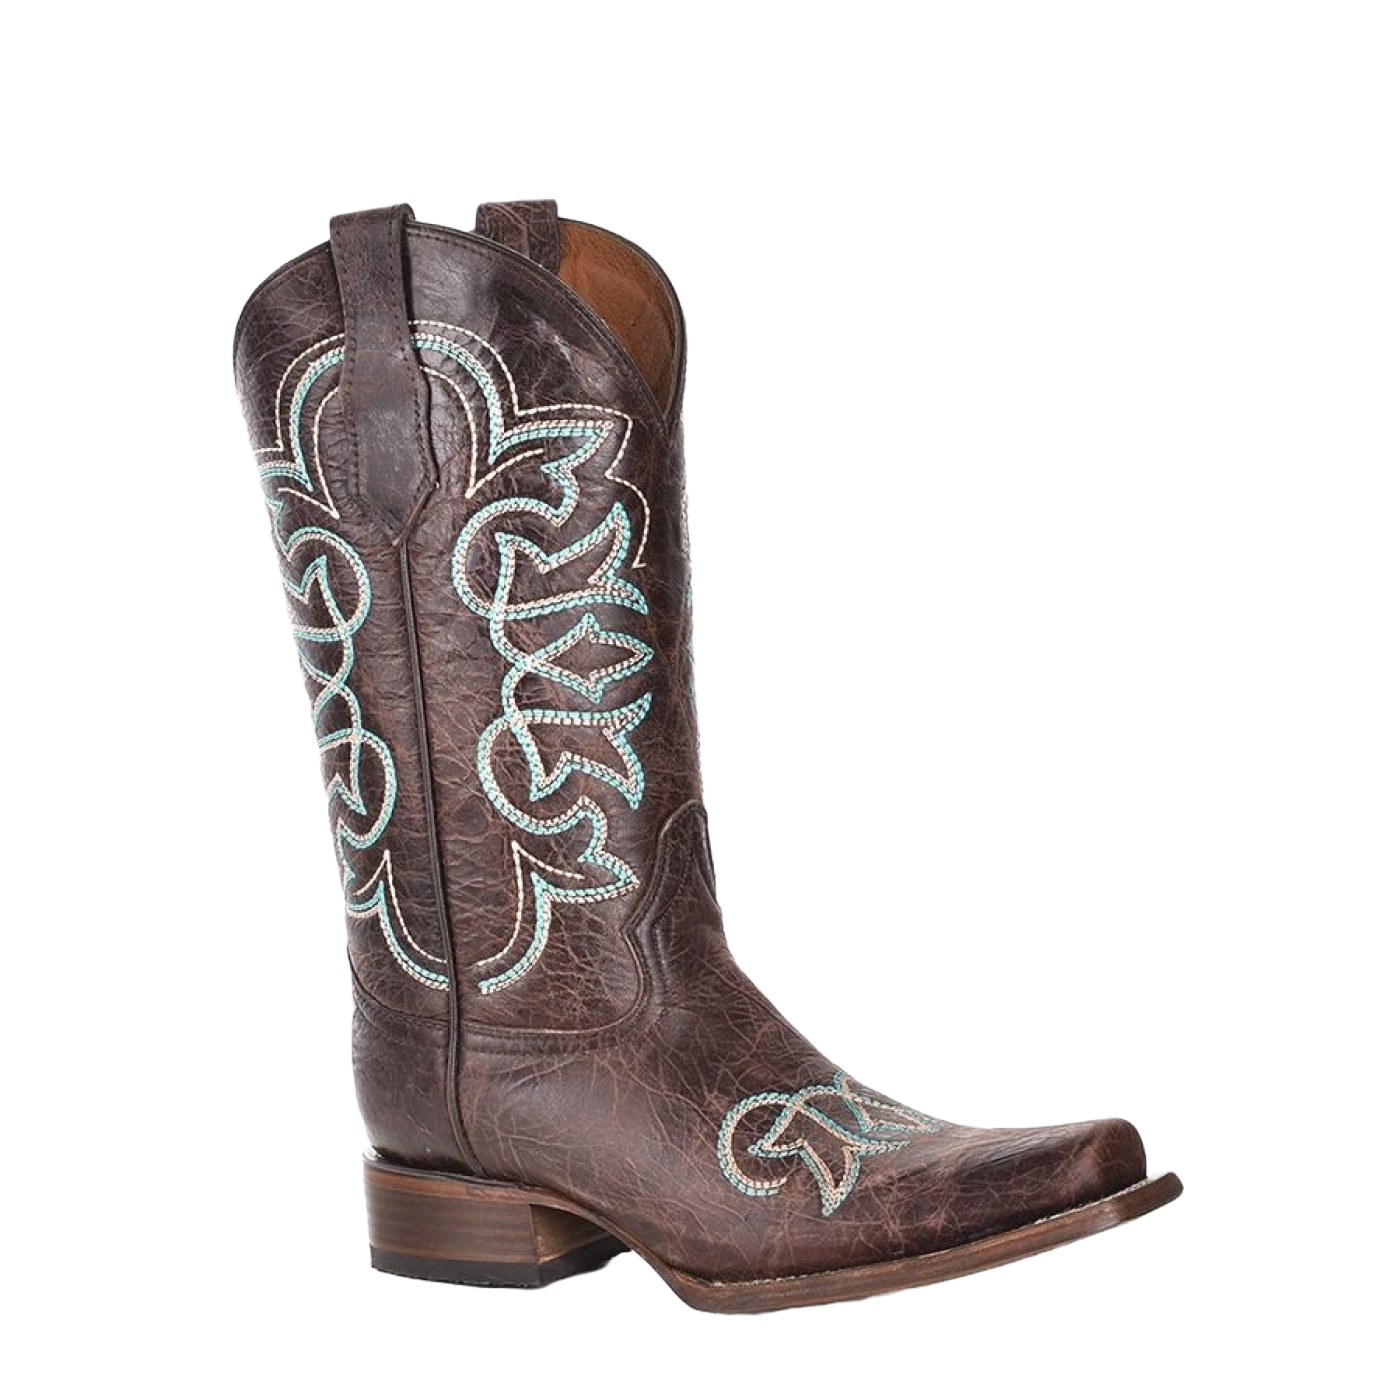 Circle G by Corral Ladies Embroidered Brown & Turquoise Western Boots L5640